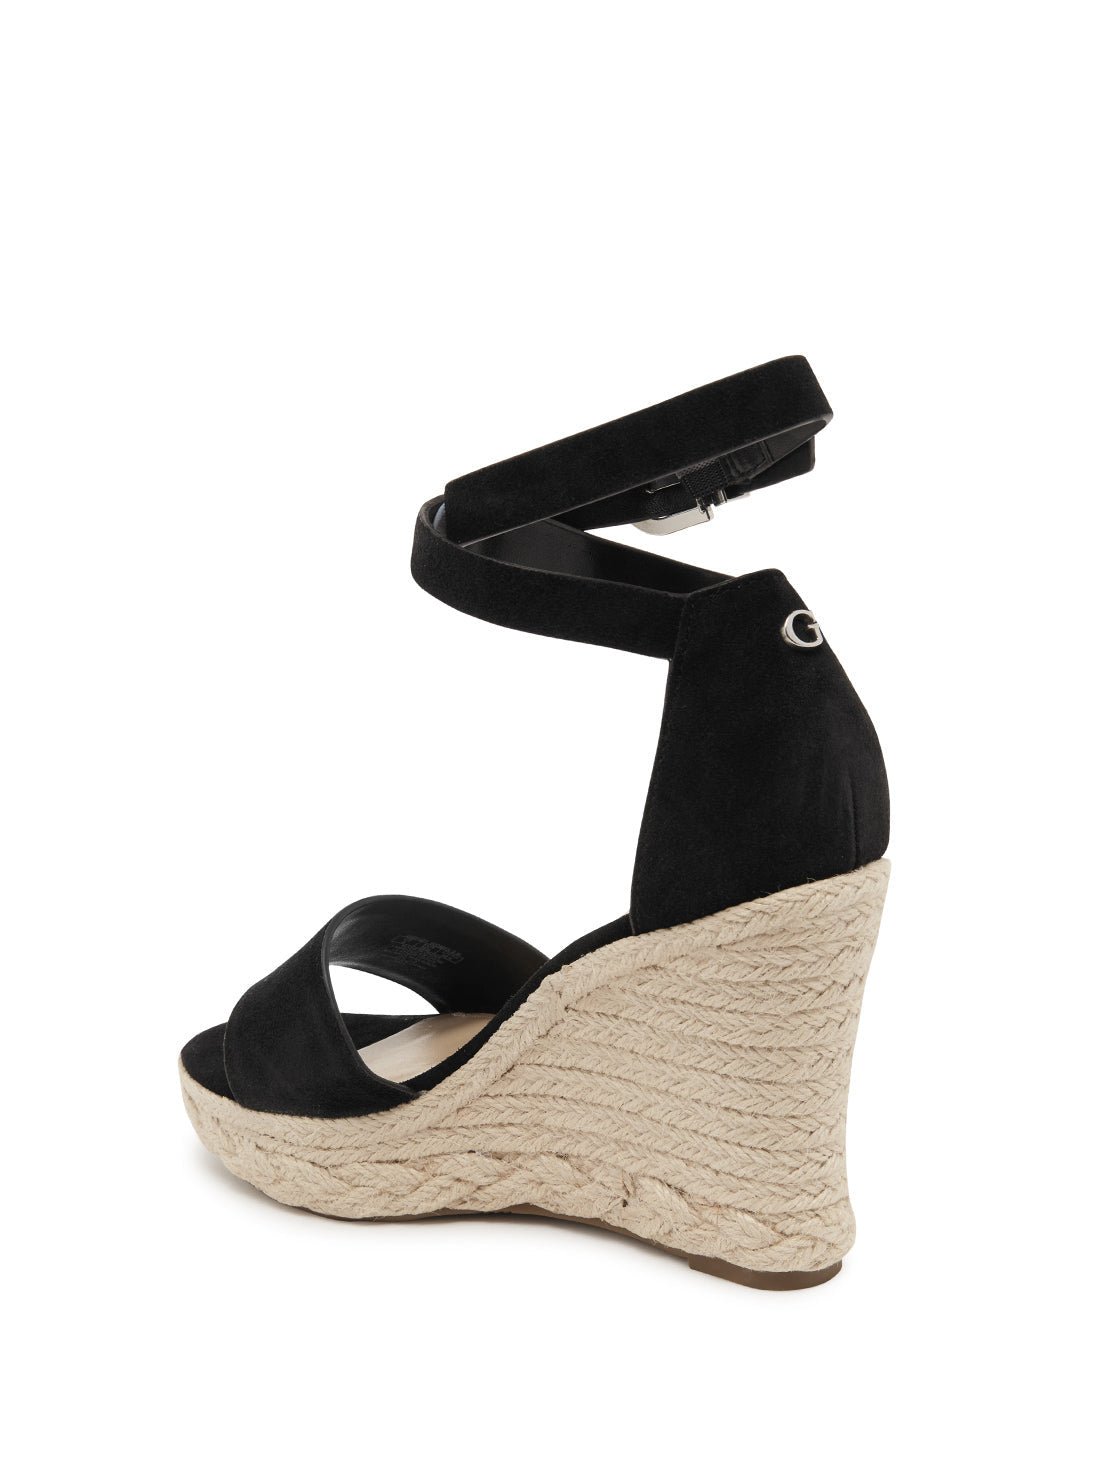 GUESS Womens Black Hidy Suede Espadrille Wedges HIDY Back View